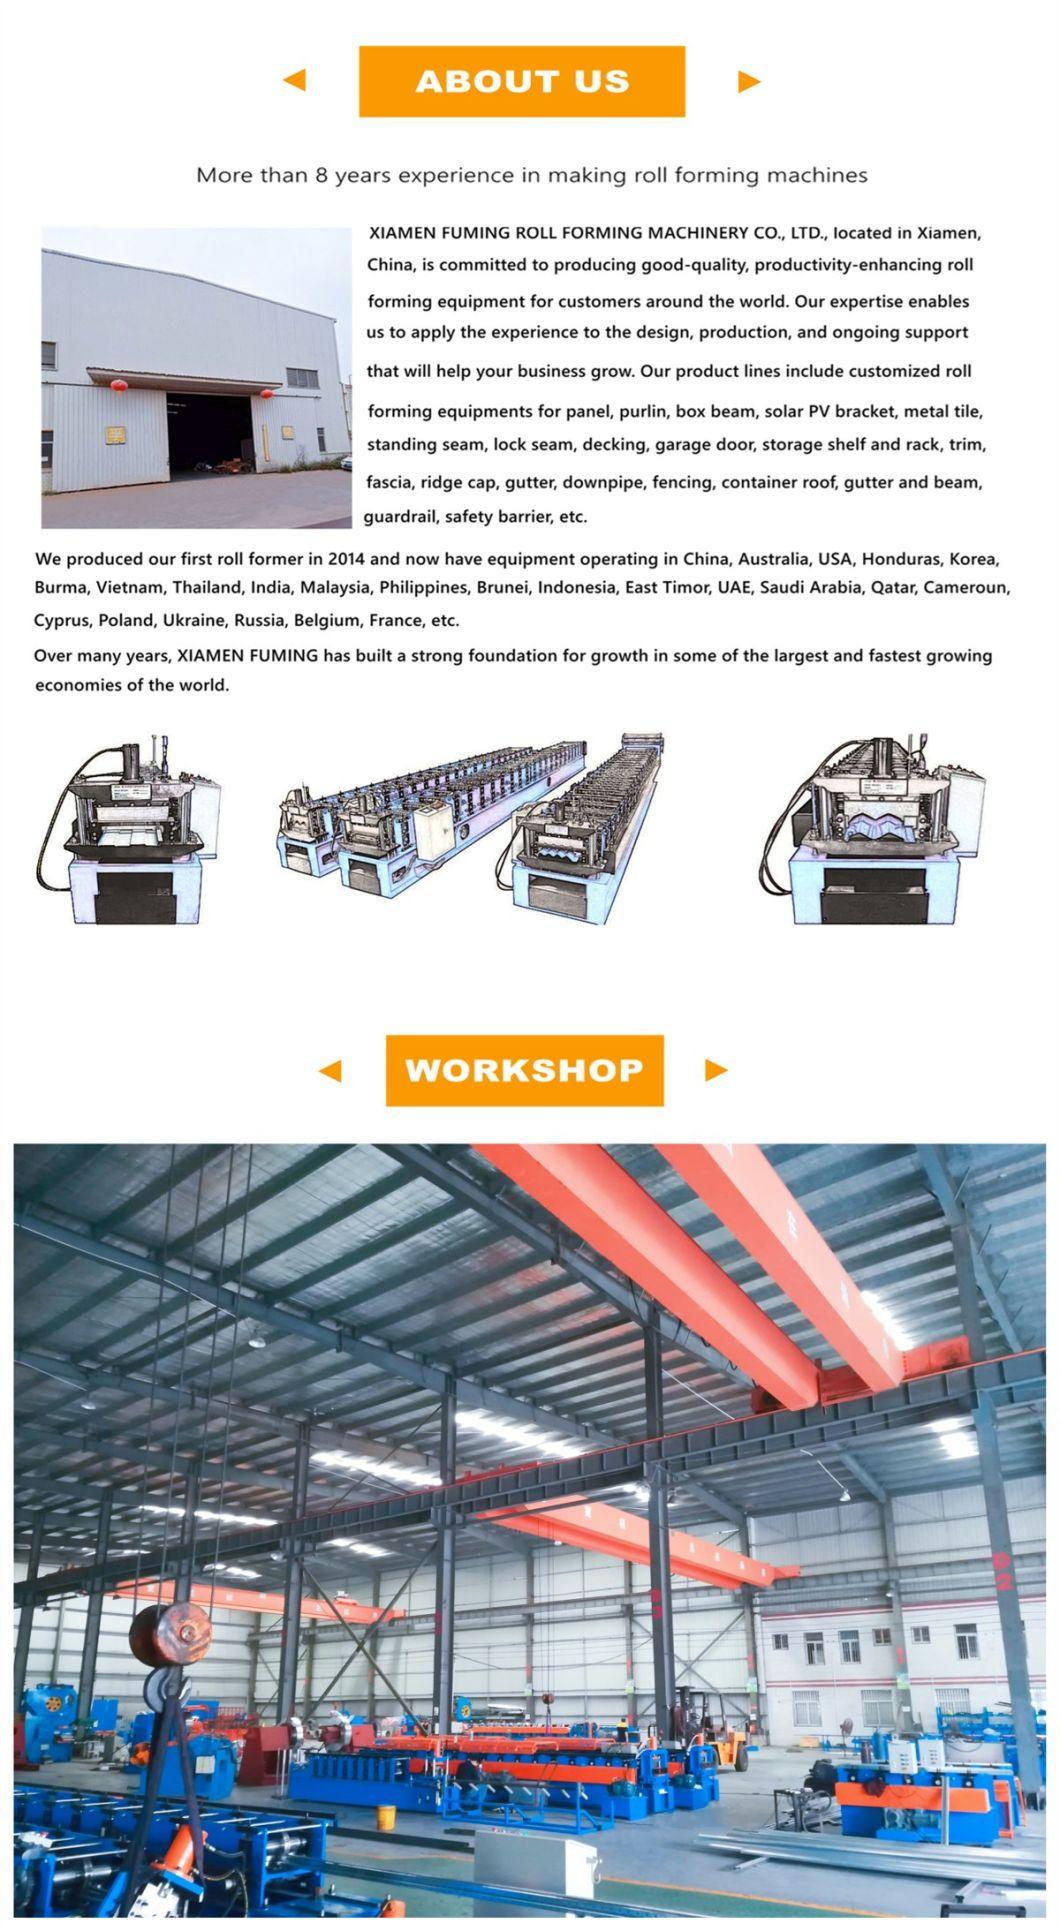 Roof Gear/Sprocket, Gear Box or Toroidal Worm Tile Forming Machine S